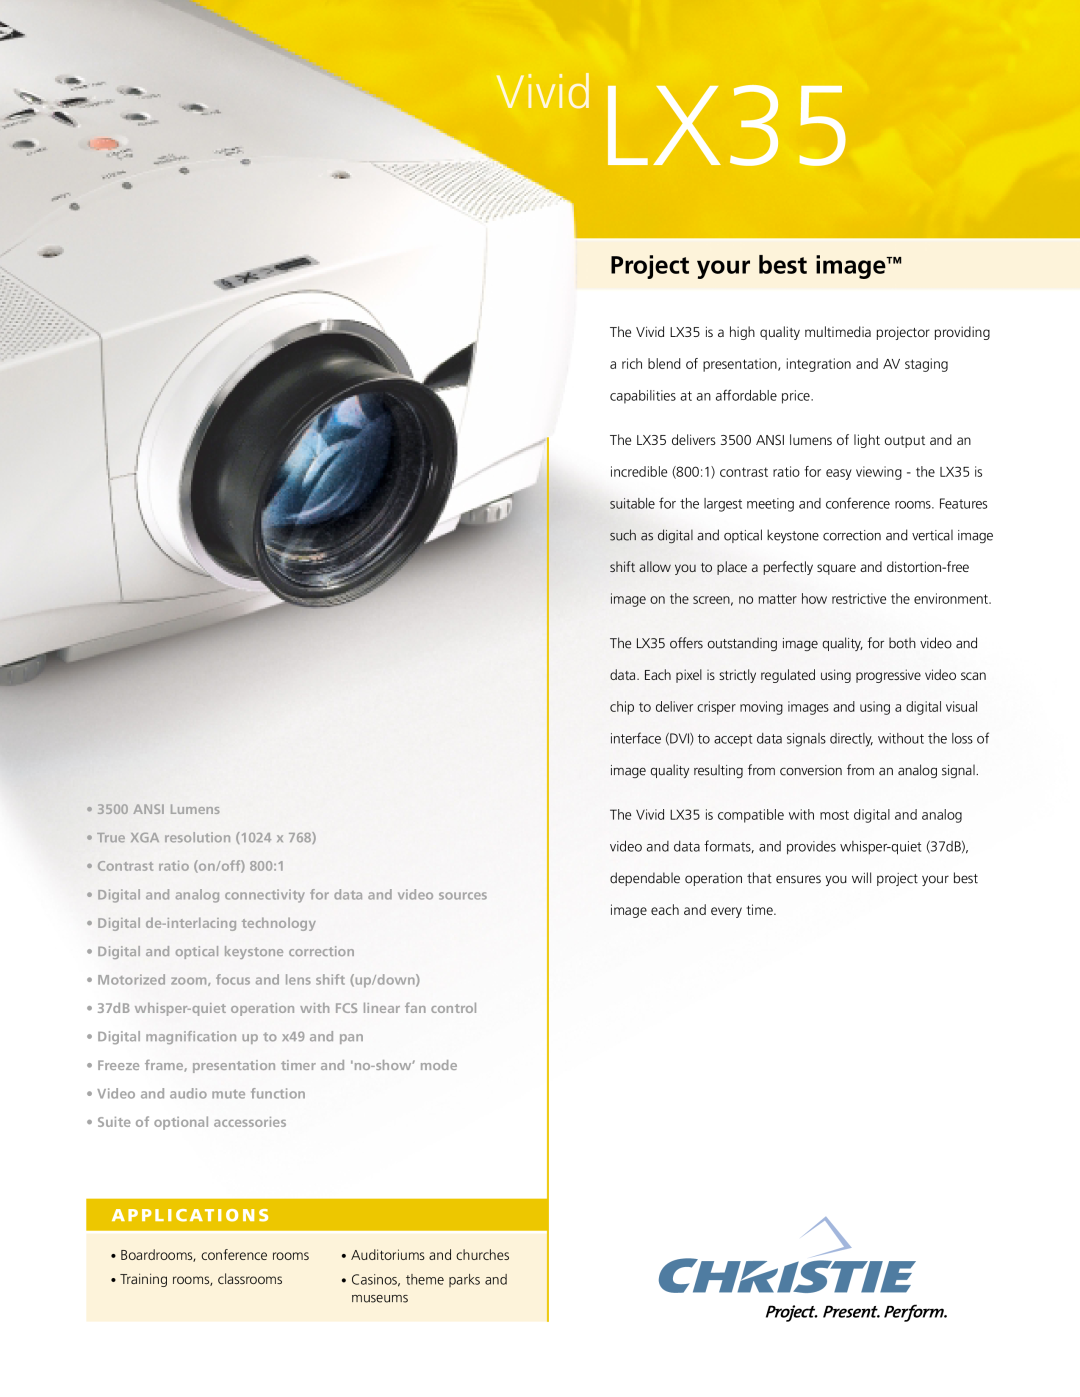 Christie Digital Systems manual A P P L I C At I O N S, Vivid LX35, Project your best image, Training rooms, classrooms 